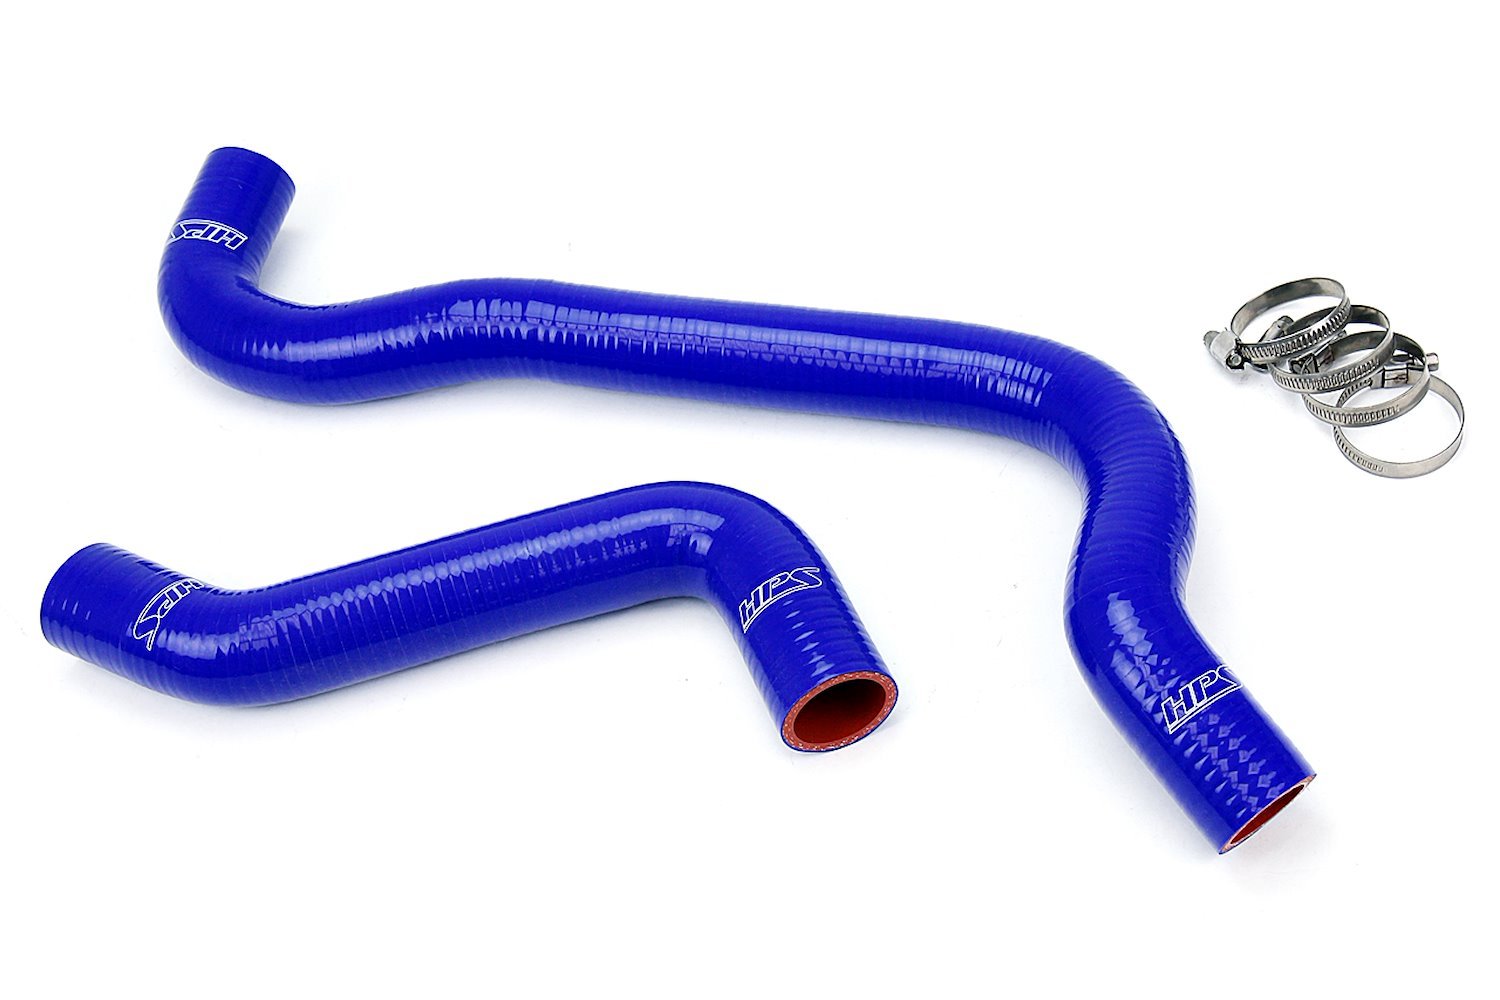 57-1009-BLUE Radiator Hose Kit, High-Temp 3-Ply Reinforced Silicone, Replace OEM Rubber Radiator Coolant Hoses